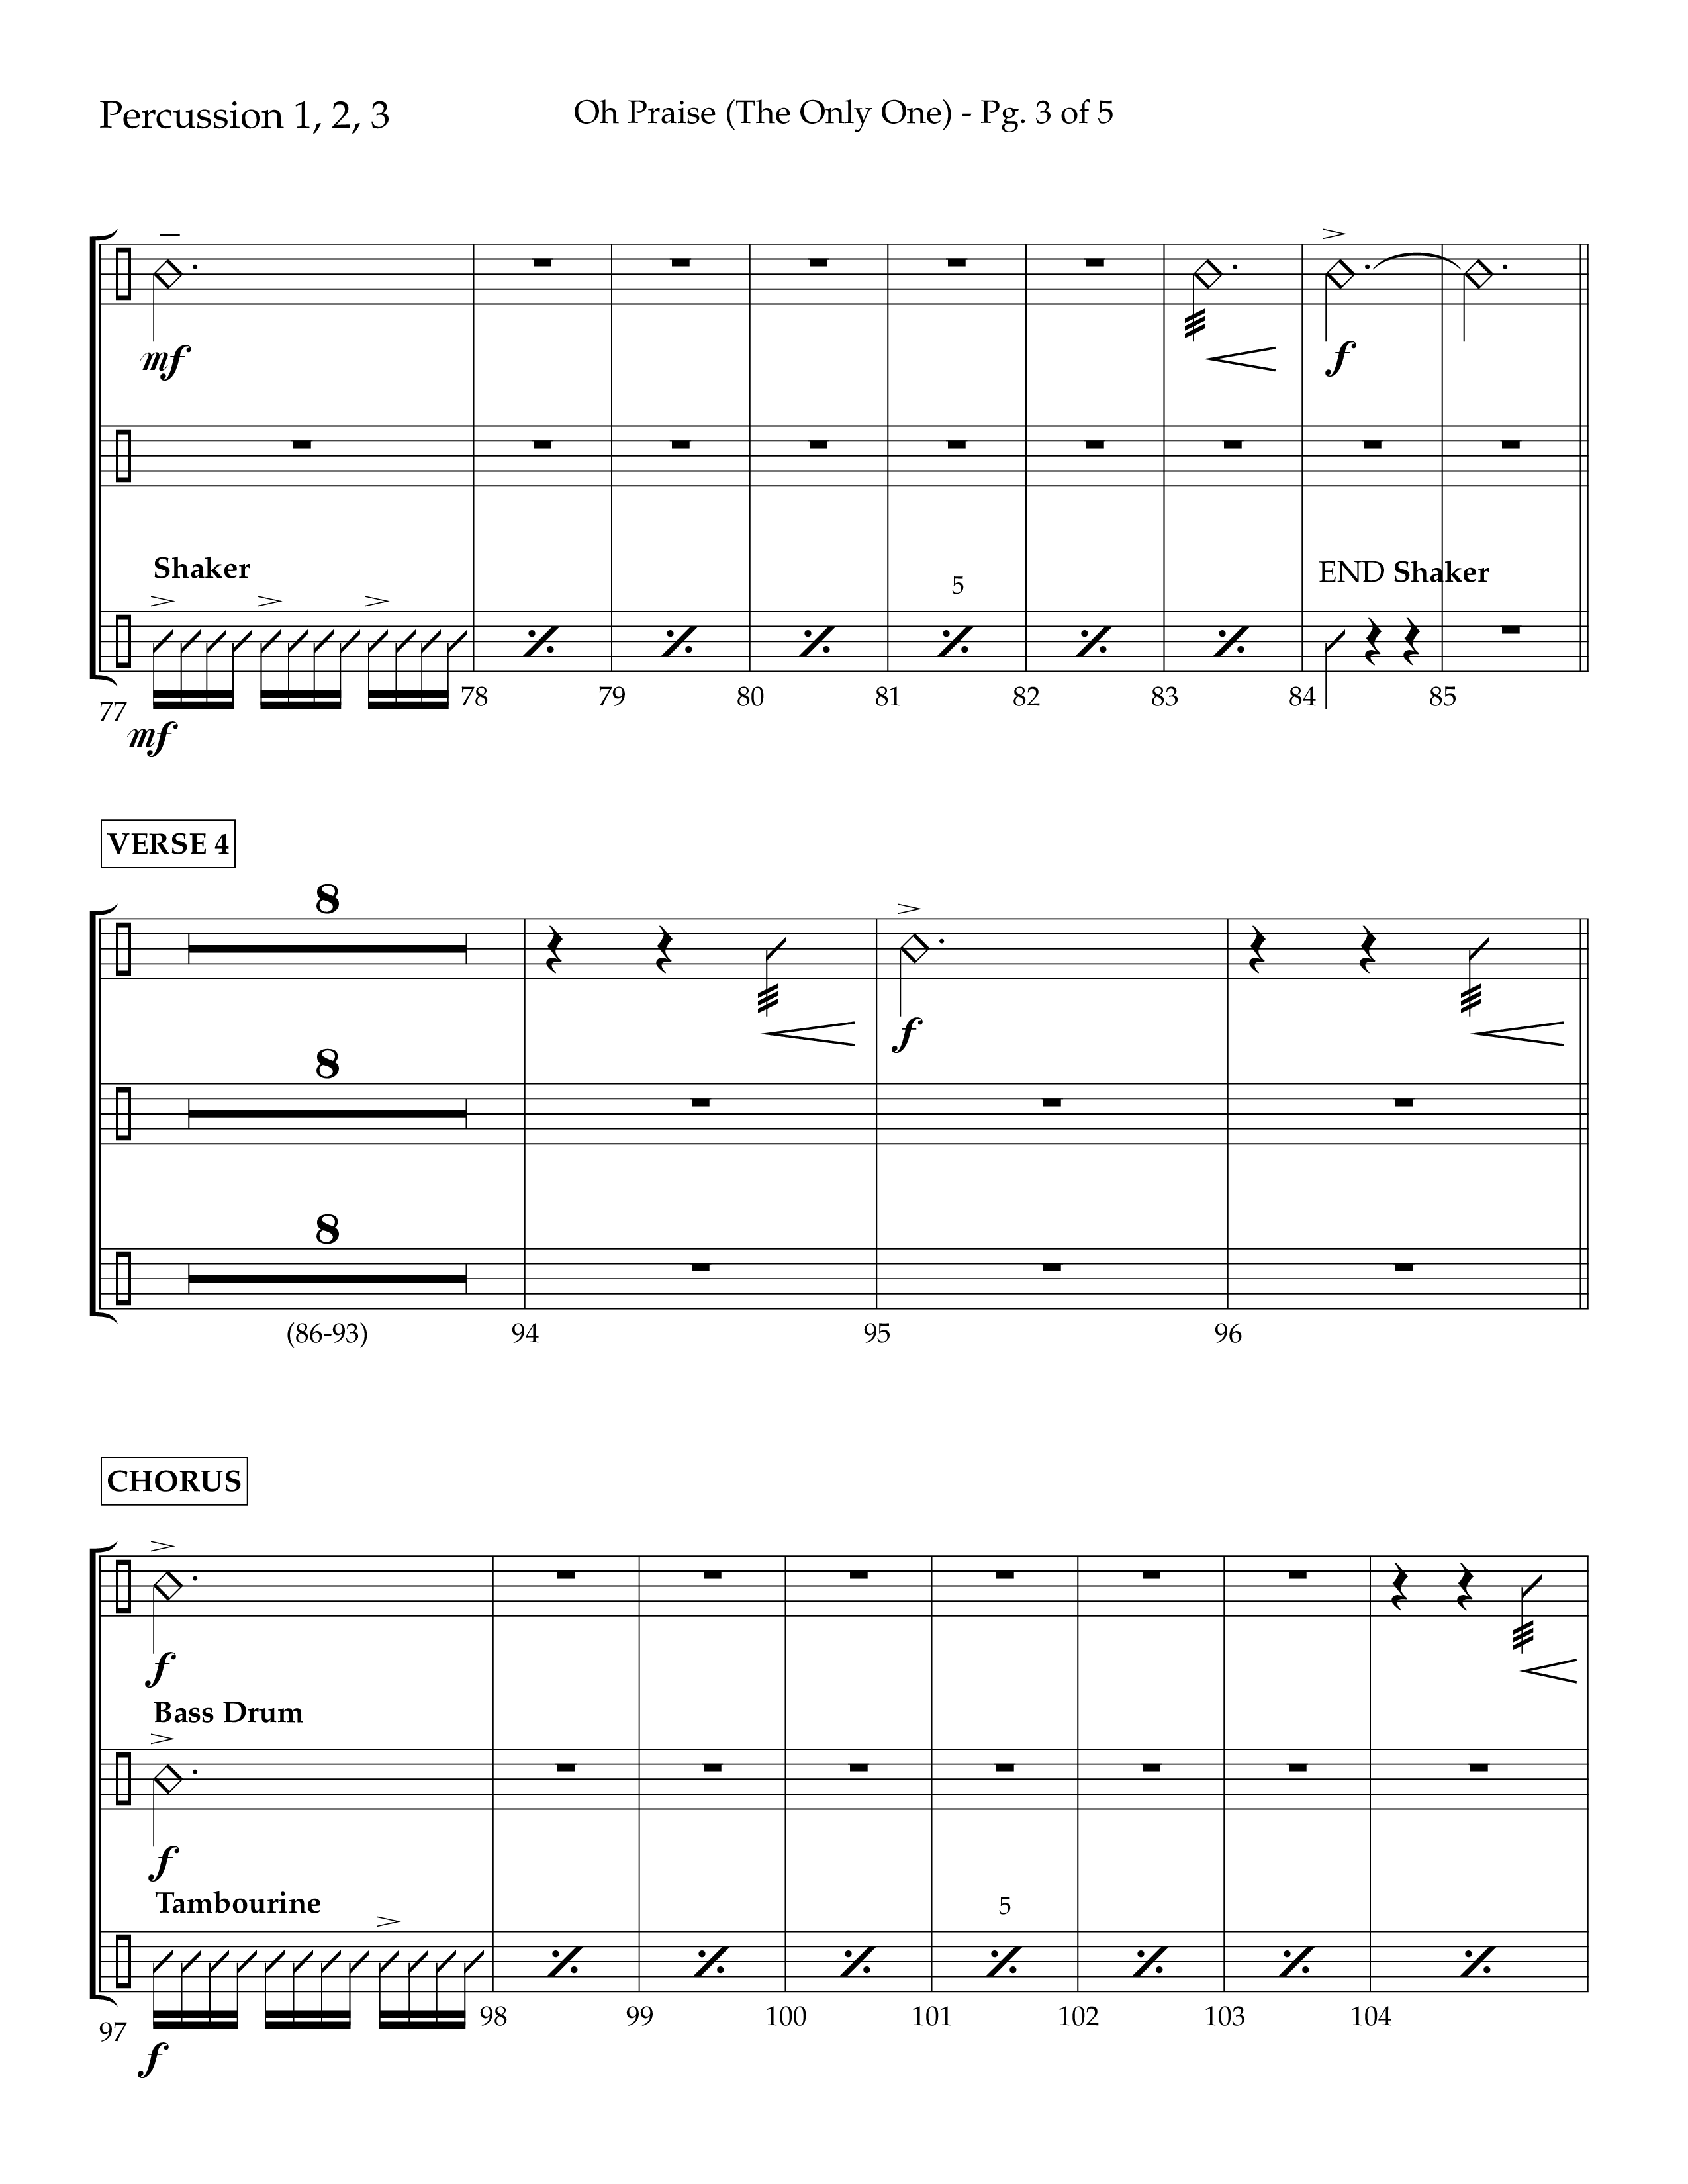 Oh Praise (The Only One) with Doxology (Choral Anthem SATB) Percussion 1/2 (Lifeway Choral / Arr. John Bolin / Orch. Cliff Duren)